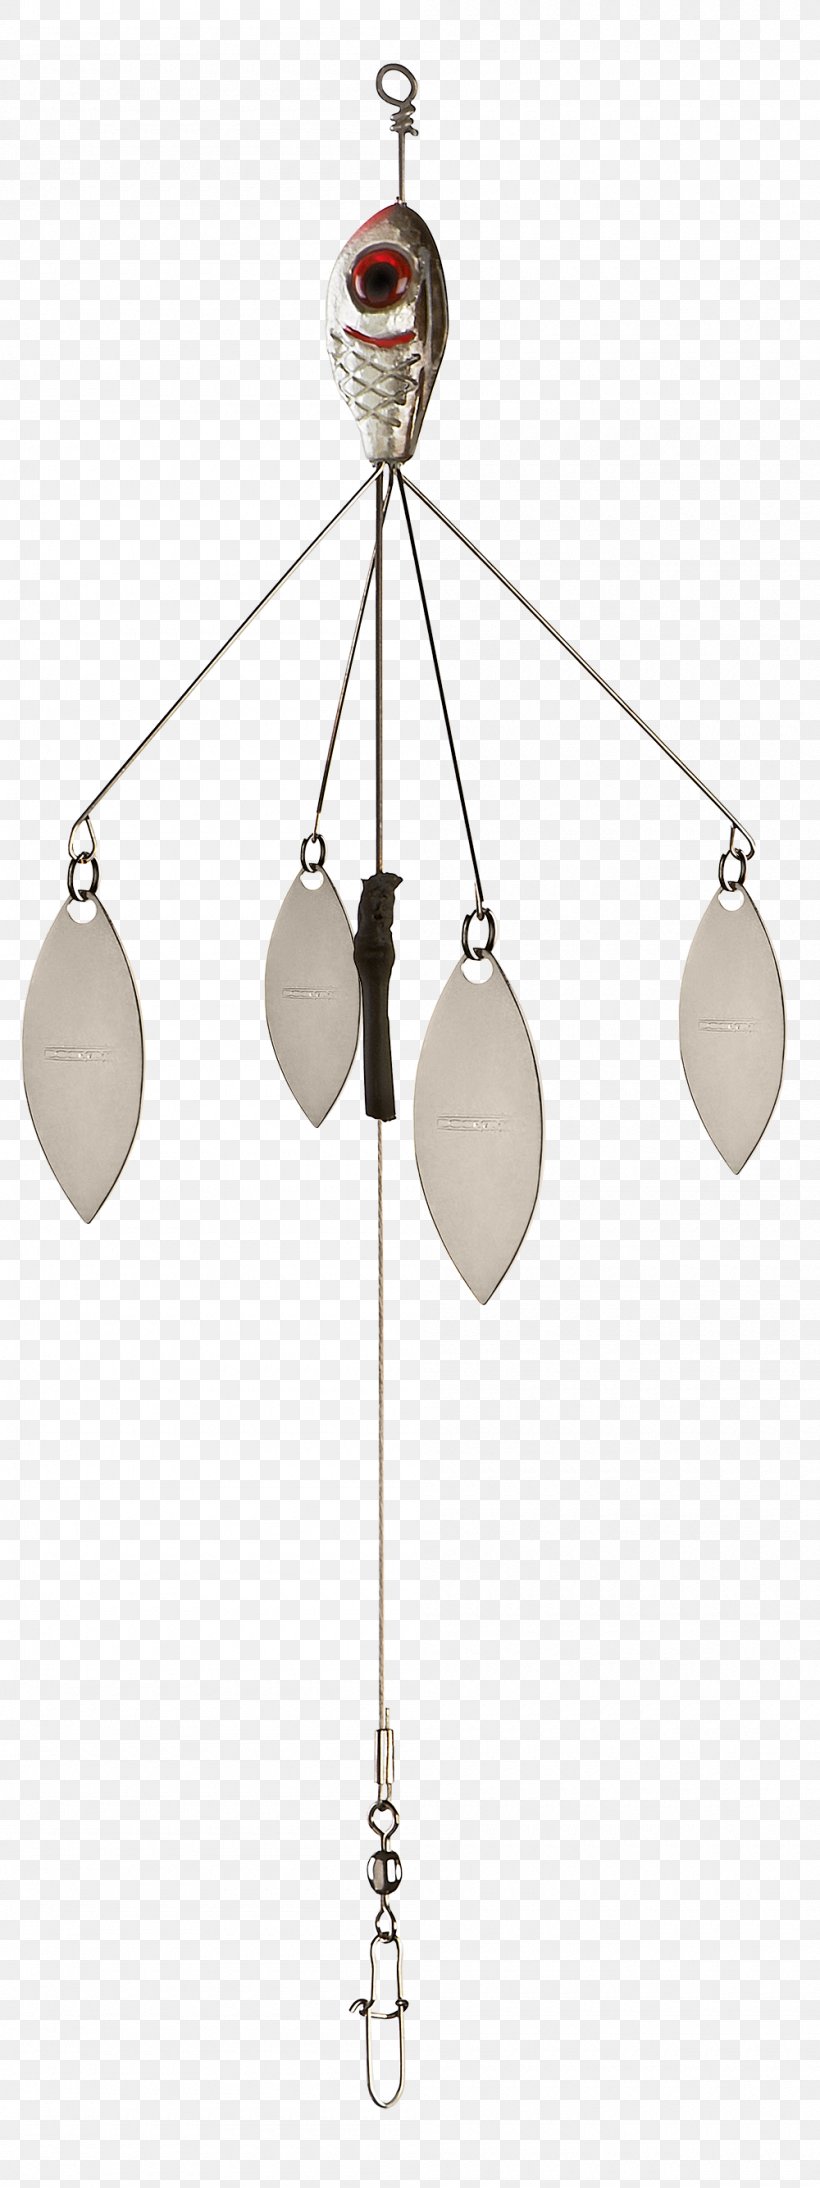 Fishing Baits & Lures Rig Booyah, PNG, 1000x2669px, Fishing Baits Lures, Alpine Electronics, Bait, Booyah, Ceiling Fixture Download Free